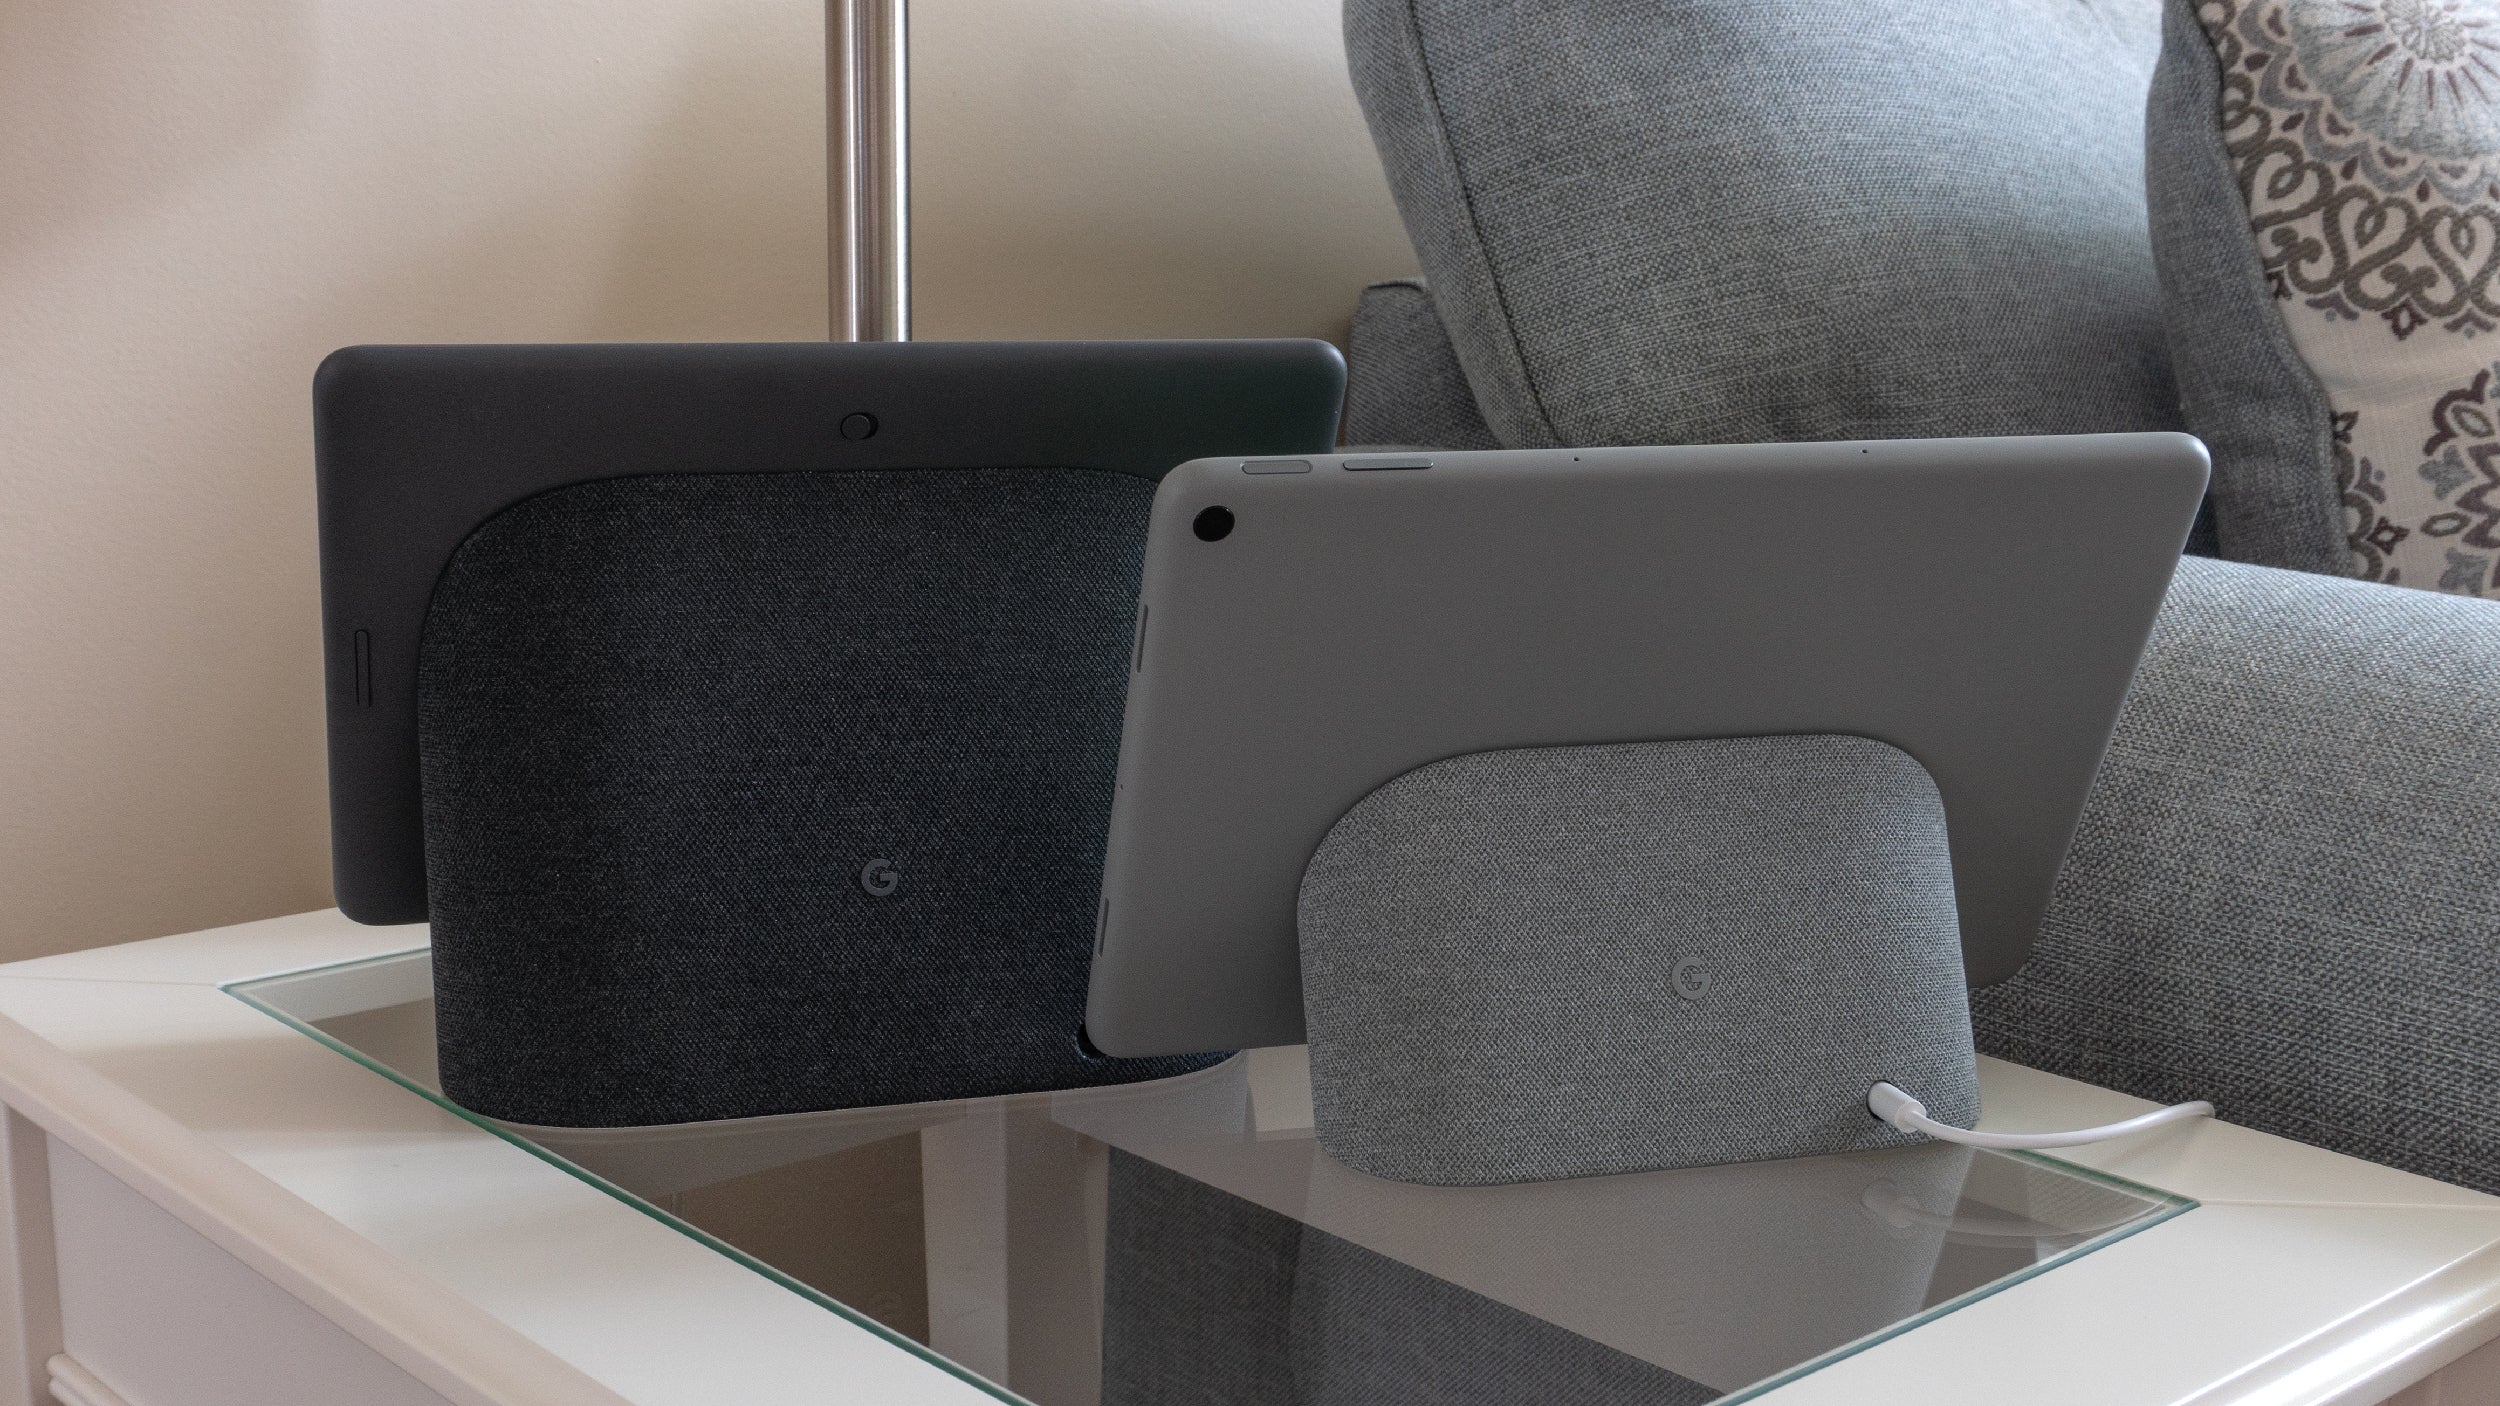 The Google Nest Hub Max's base (left) is much larger than the Pixel Tablet's (right), and houses more speakers that pump out much better sound than the docked tablet does. (Photo: Andrew Liszewski | Gizmodo)